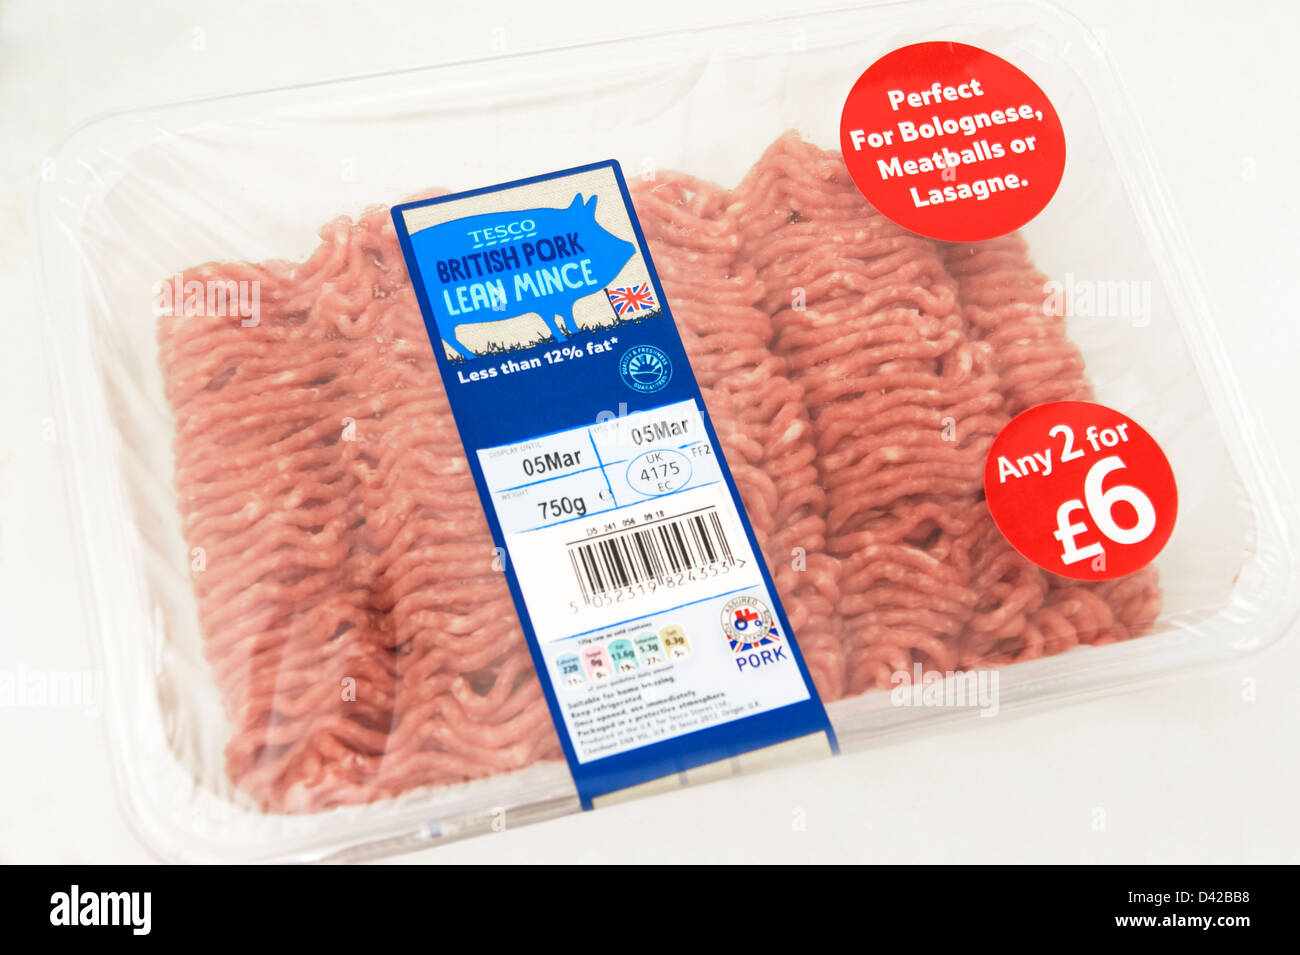 Tesco BRITISH pork lean mince healthy eating with the ...